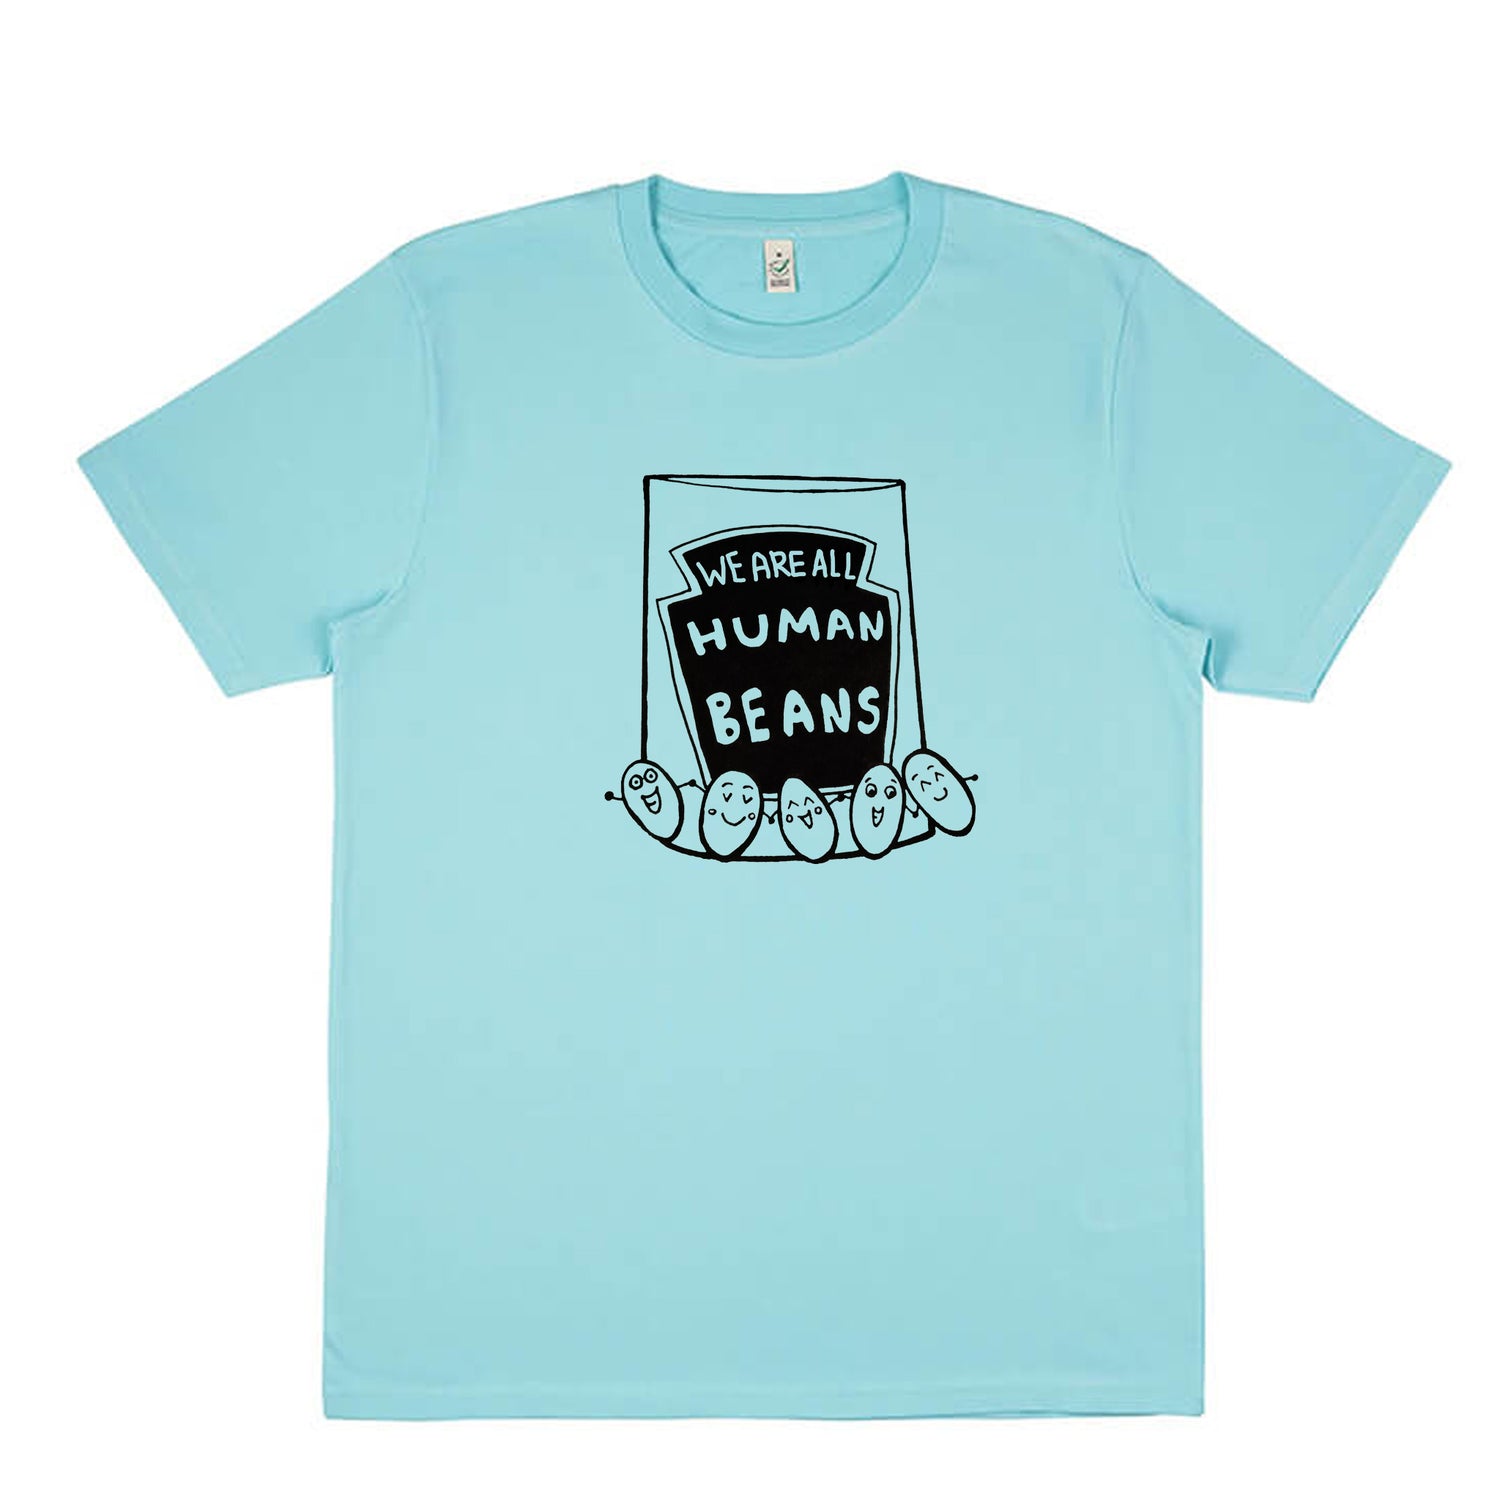 We are all Human Beans Organic Shirt